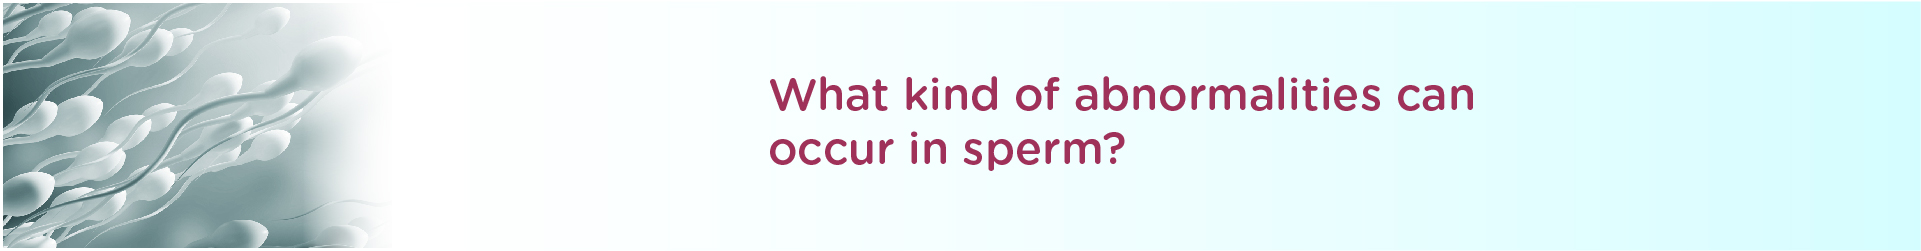 What Kind of Abnormalities Can Occur in Sperm?